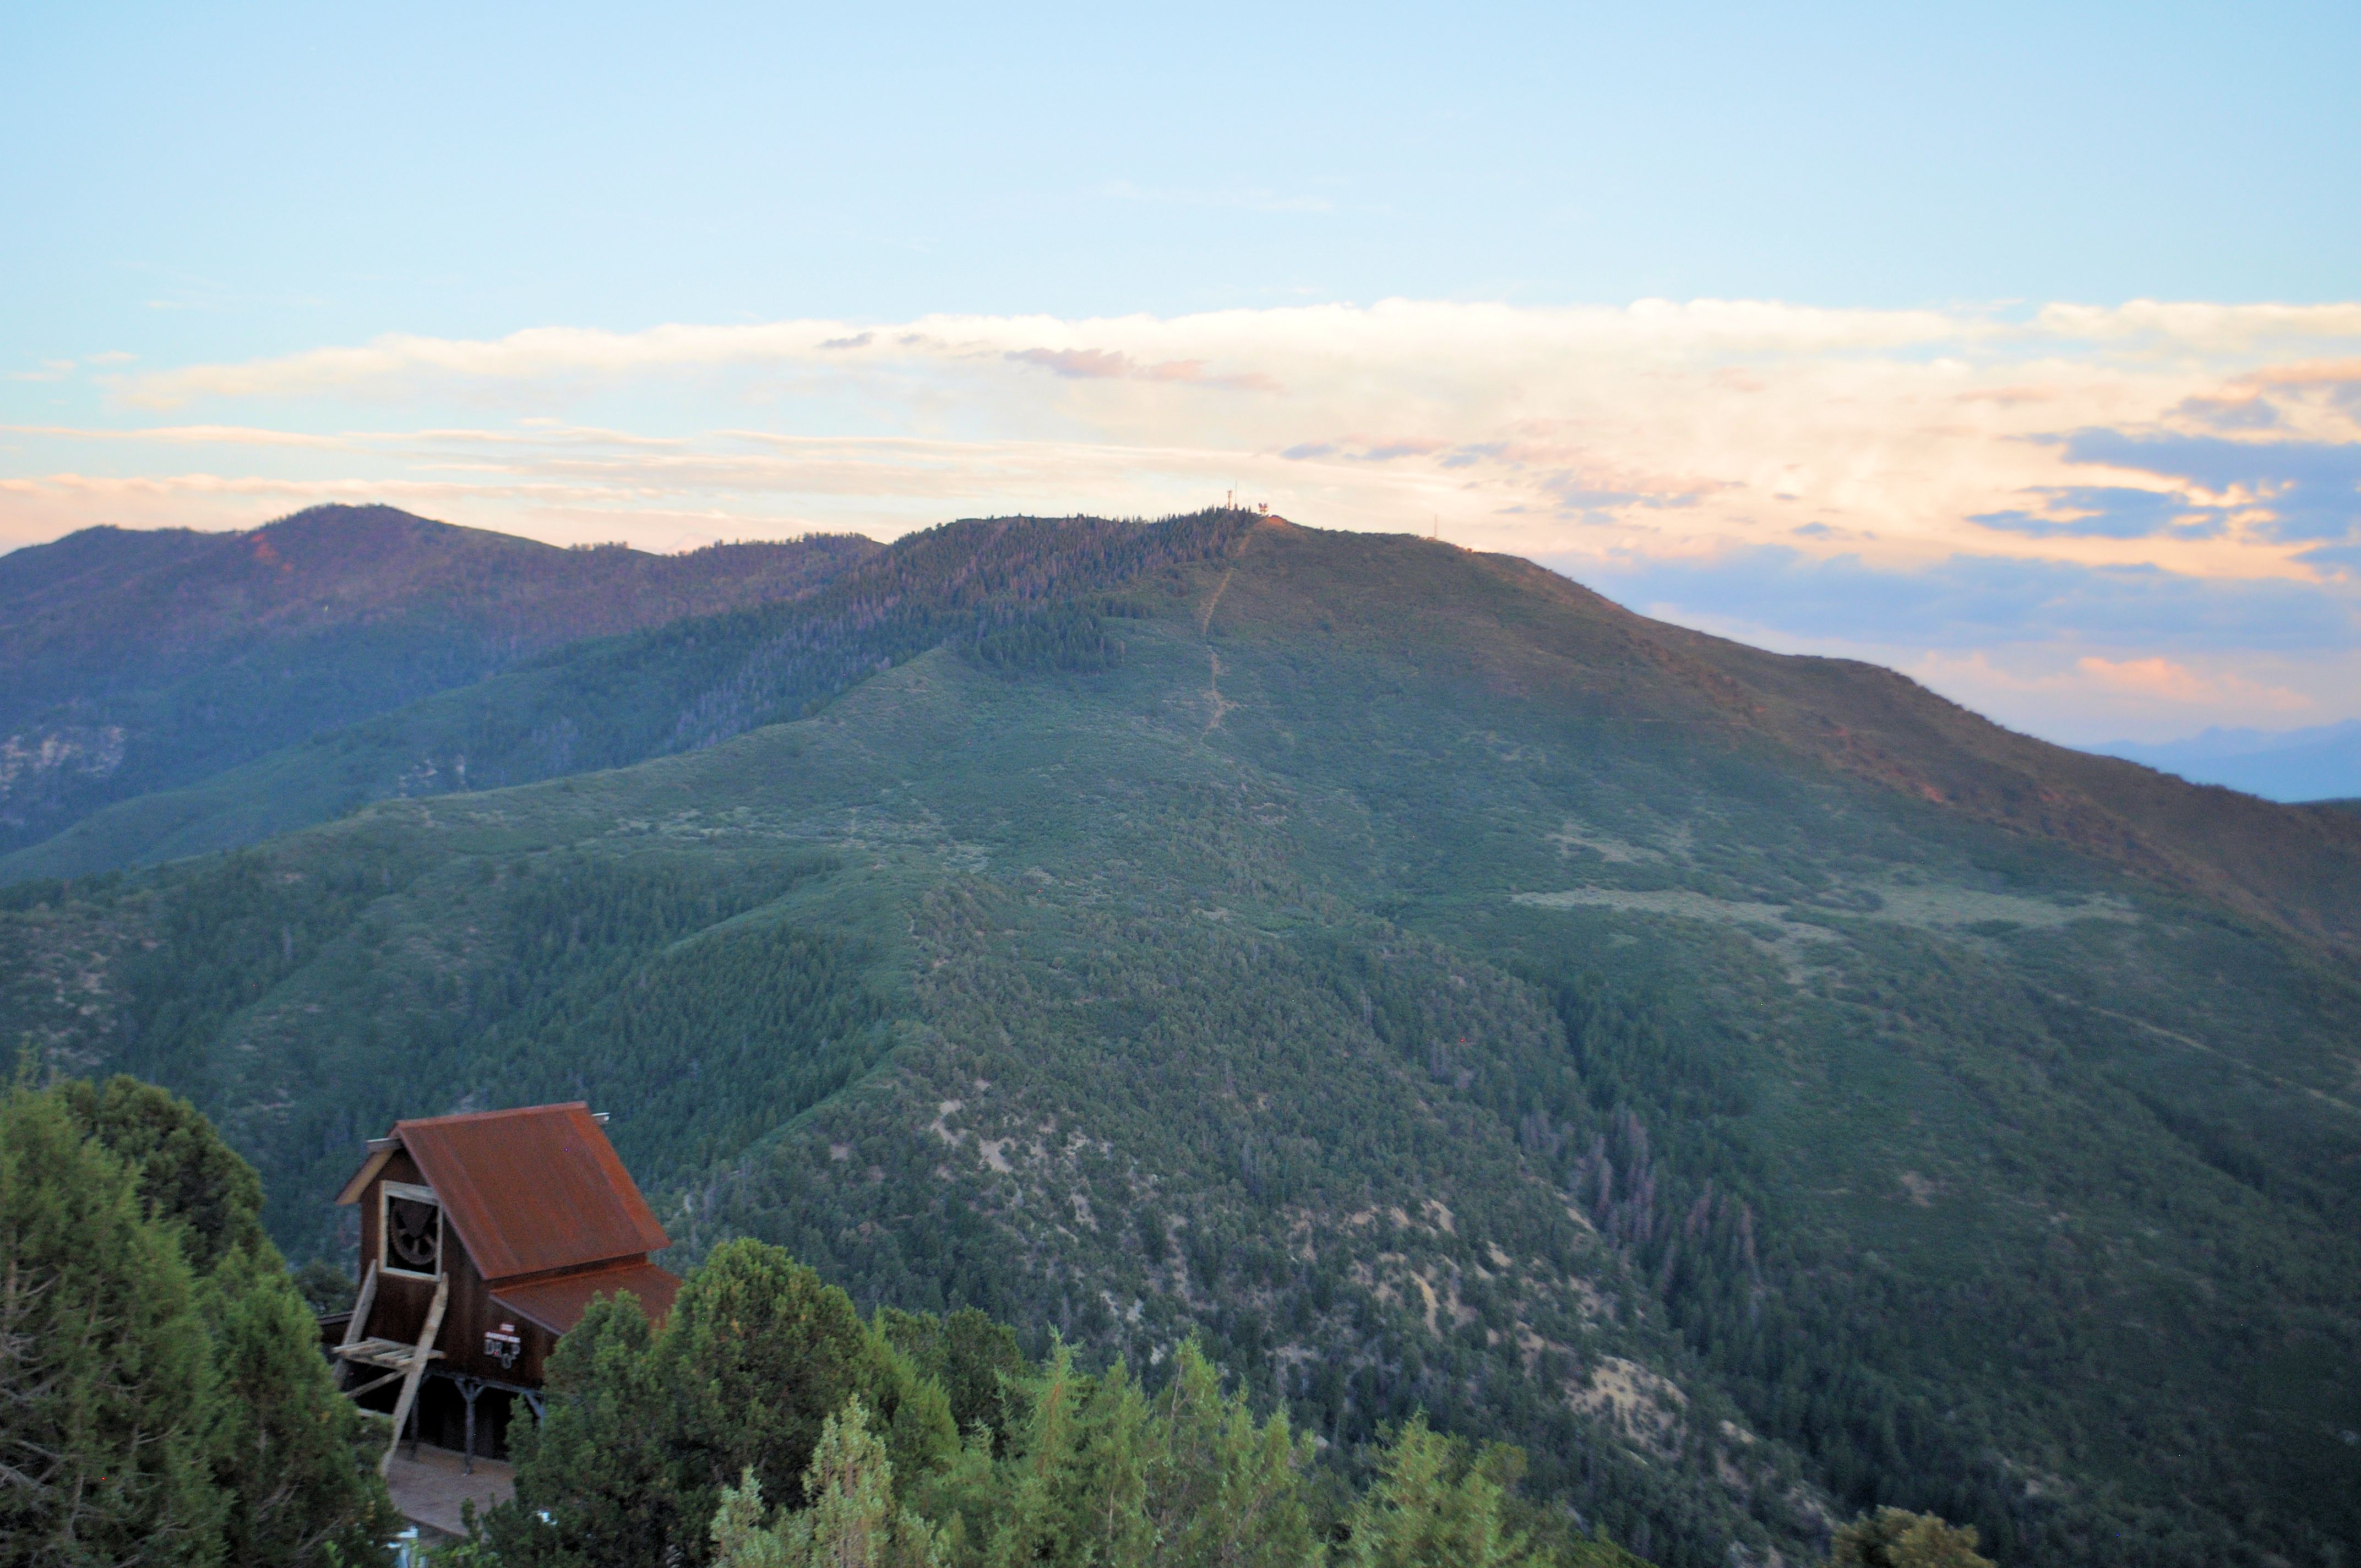 The Haunted Mine Drop is nestled on top of Iron Mountain overlooking Glenwood Springs, Colorado.